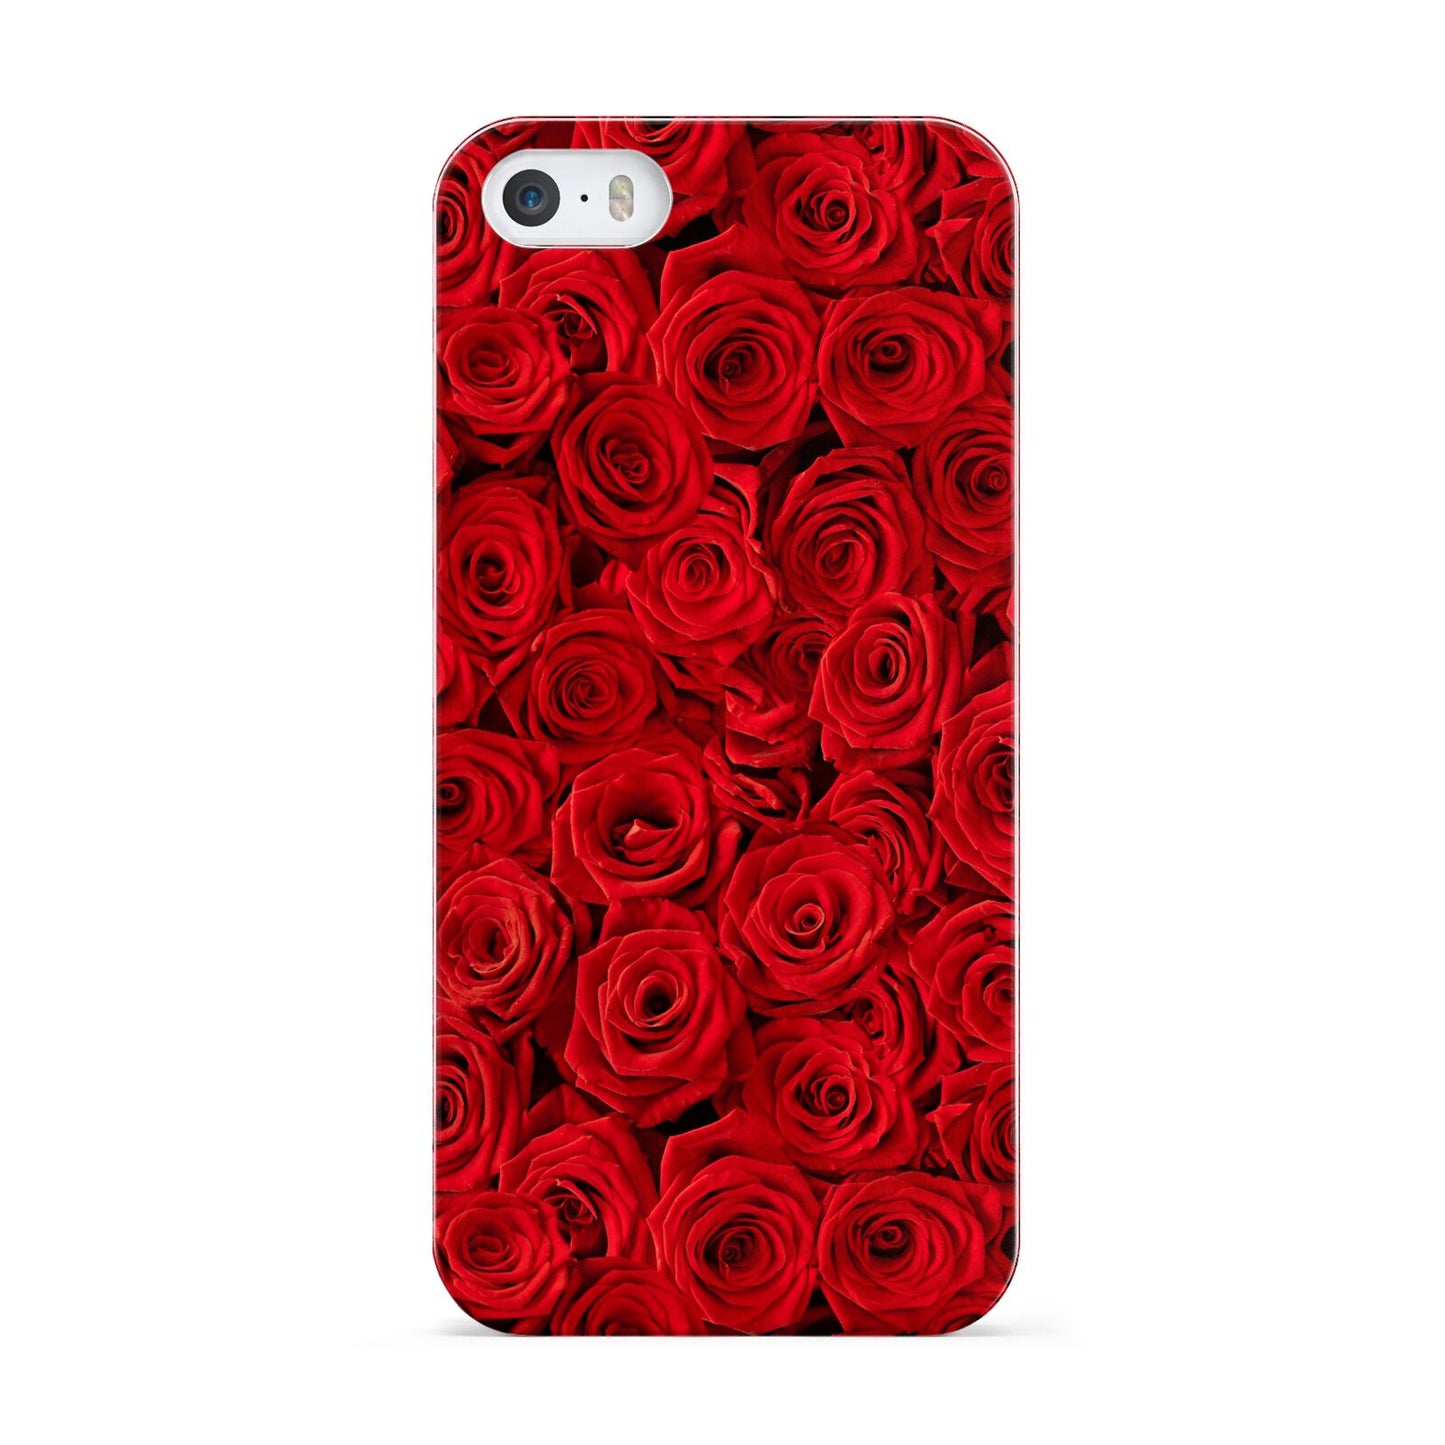 test THNG23 342 Apple iPhone 5 Case